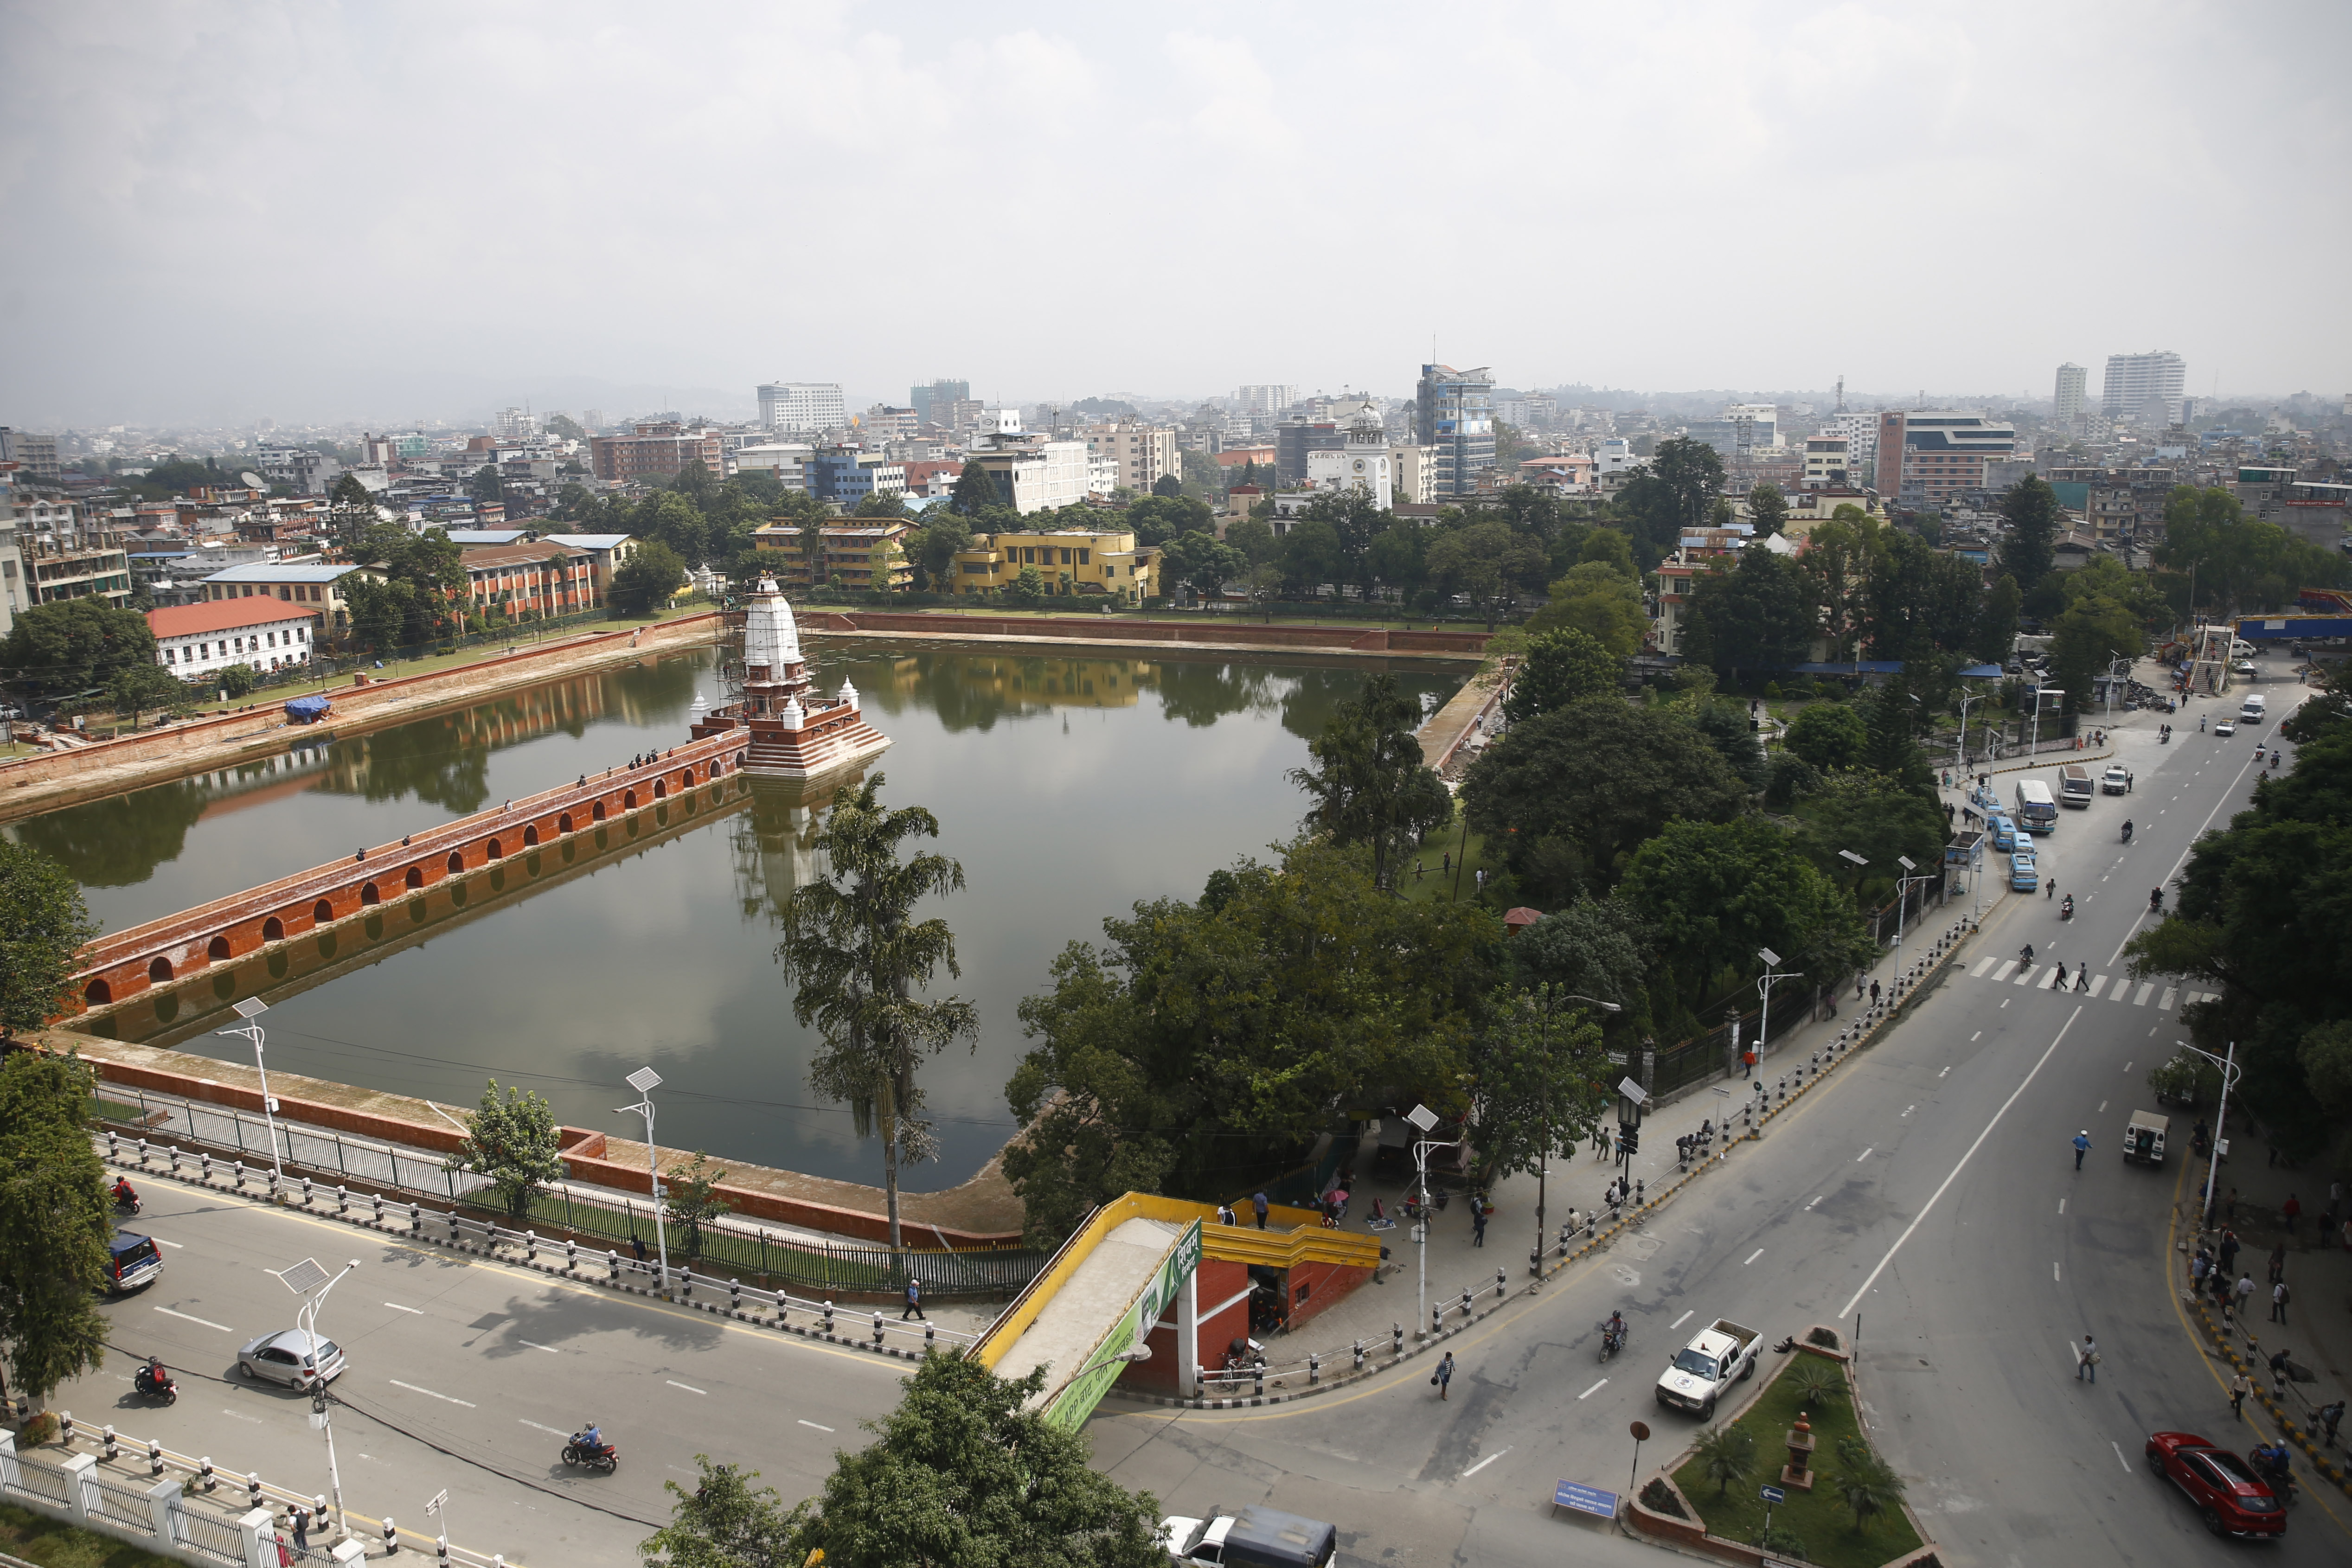 The spire is placed on top of the reconstructed Balgopaleshwor Temple of the historic Rani Pokhari, queenu2019s pond, which was devastated by the earthquake in 2015 is close to being restored in Kathmandu, Nepal on Thursday, October 1, 2020.